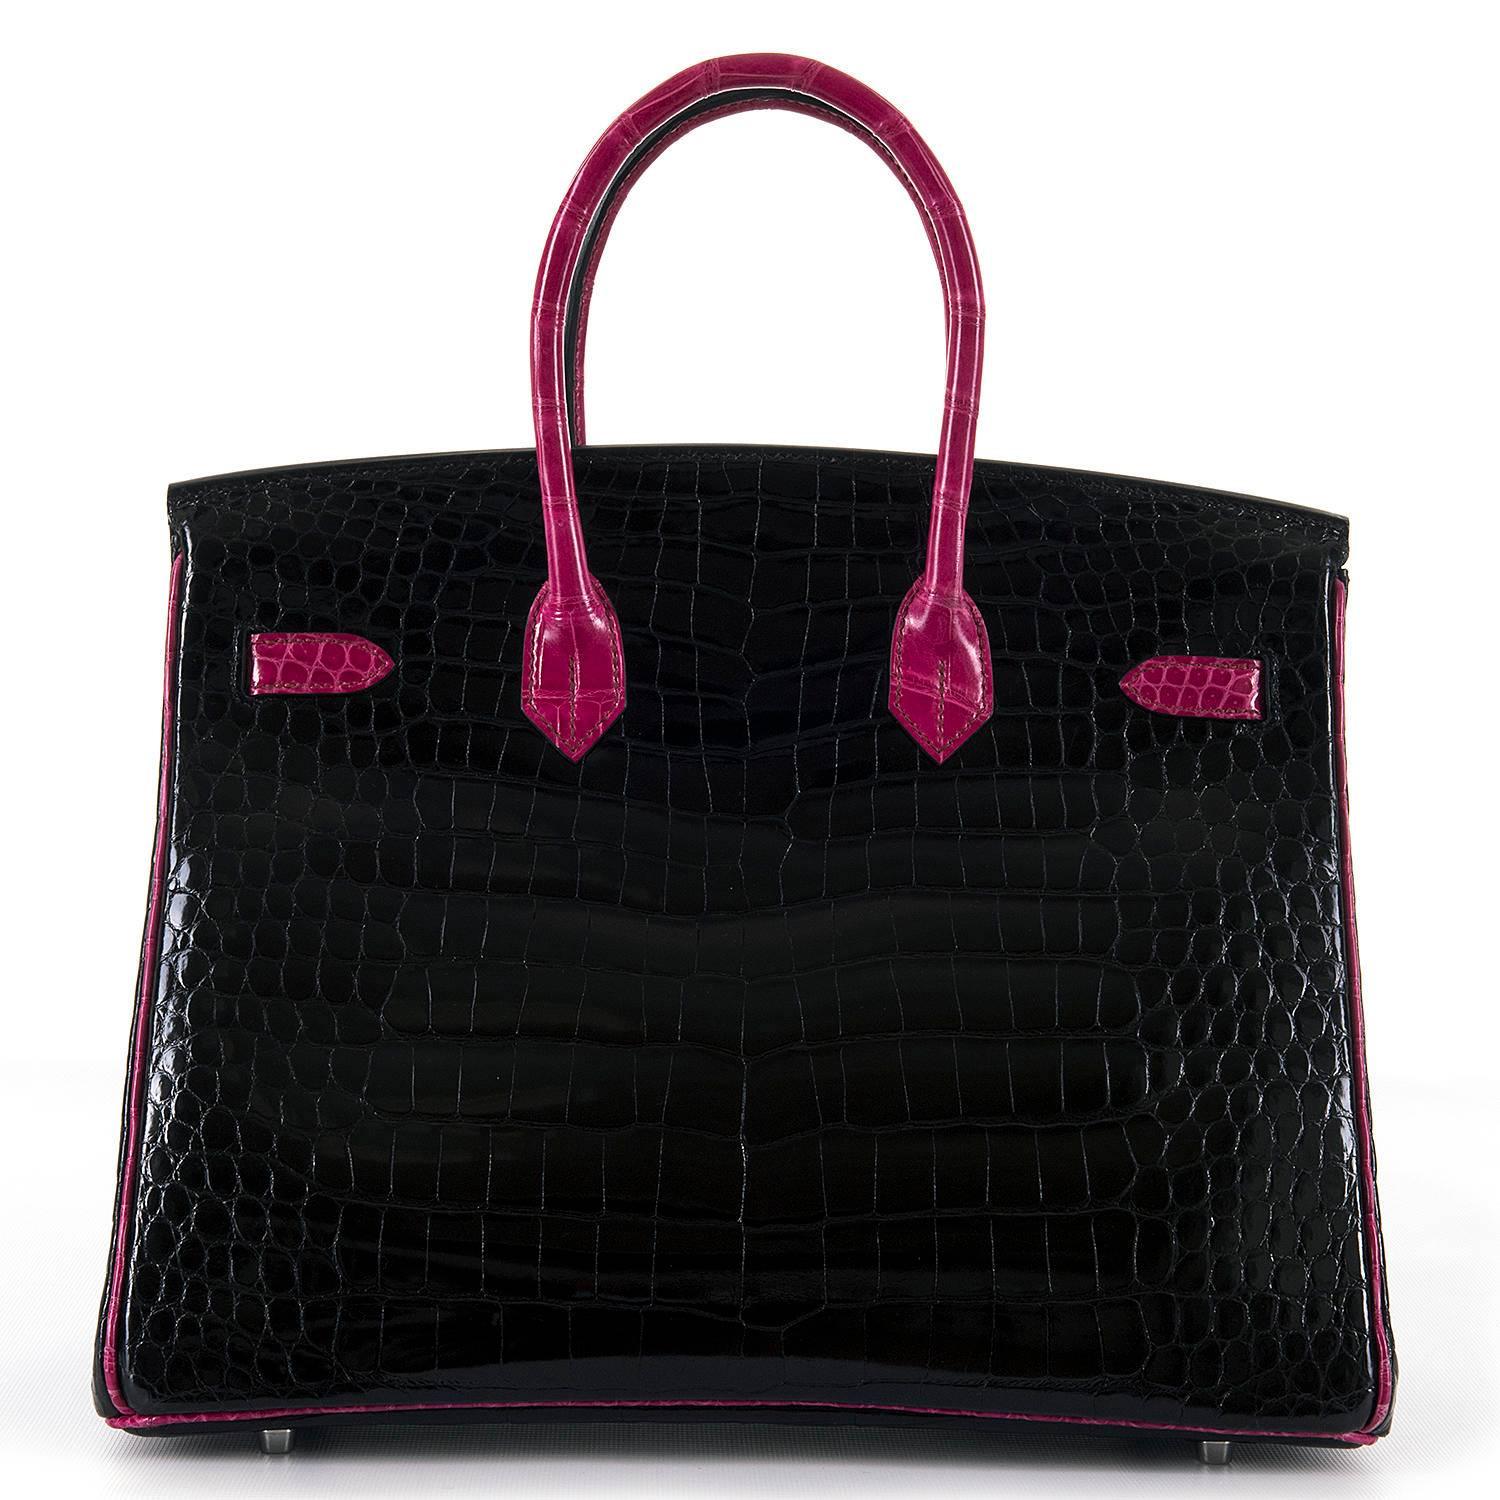 An Extremely Rare Hermes 35cm Special Order 'HSS' Shiny Crocodile Birkin Bag. In absolutely pristine condition, the bag is finished in Black with Fuchsia Pink trim, accented with silver Palladium hardware.Considered to be the ultimate luxury